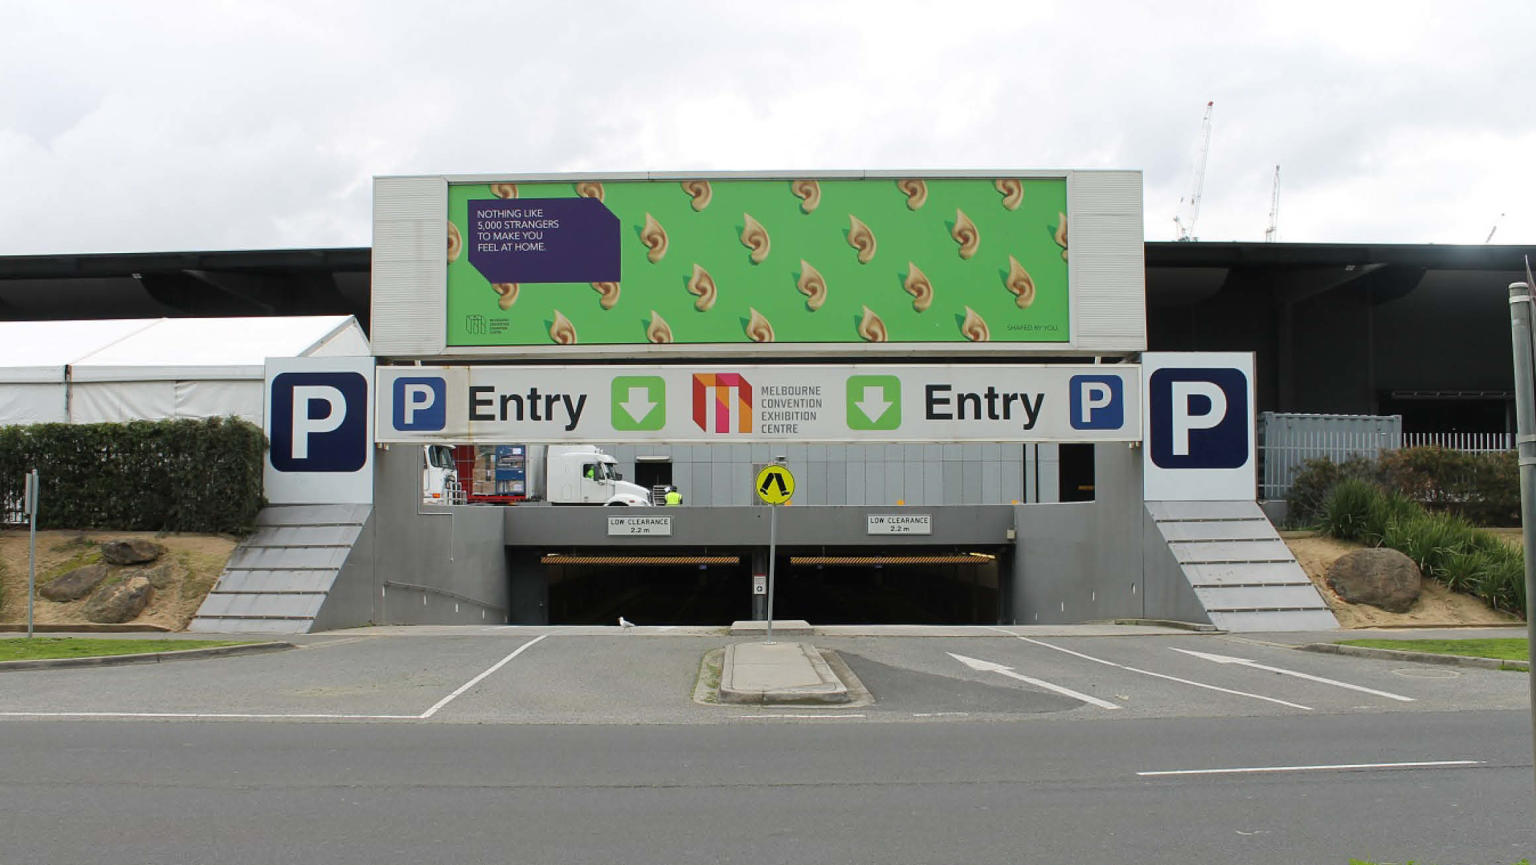 A concrete parking lot entrance marked by a prominent green sign overhead. The sign bears the humorous phrase "Nothing like 5,000 strangers to make you feel at home," accompanied by the Melbourne Convention Exhibition Centre logo in the bottom left corner.